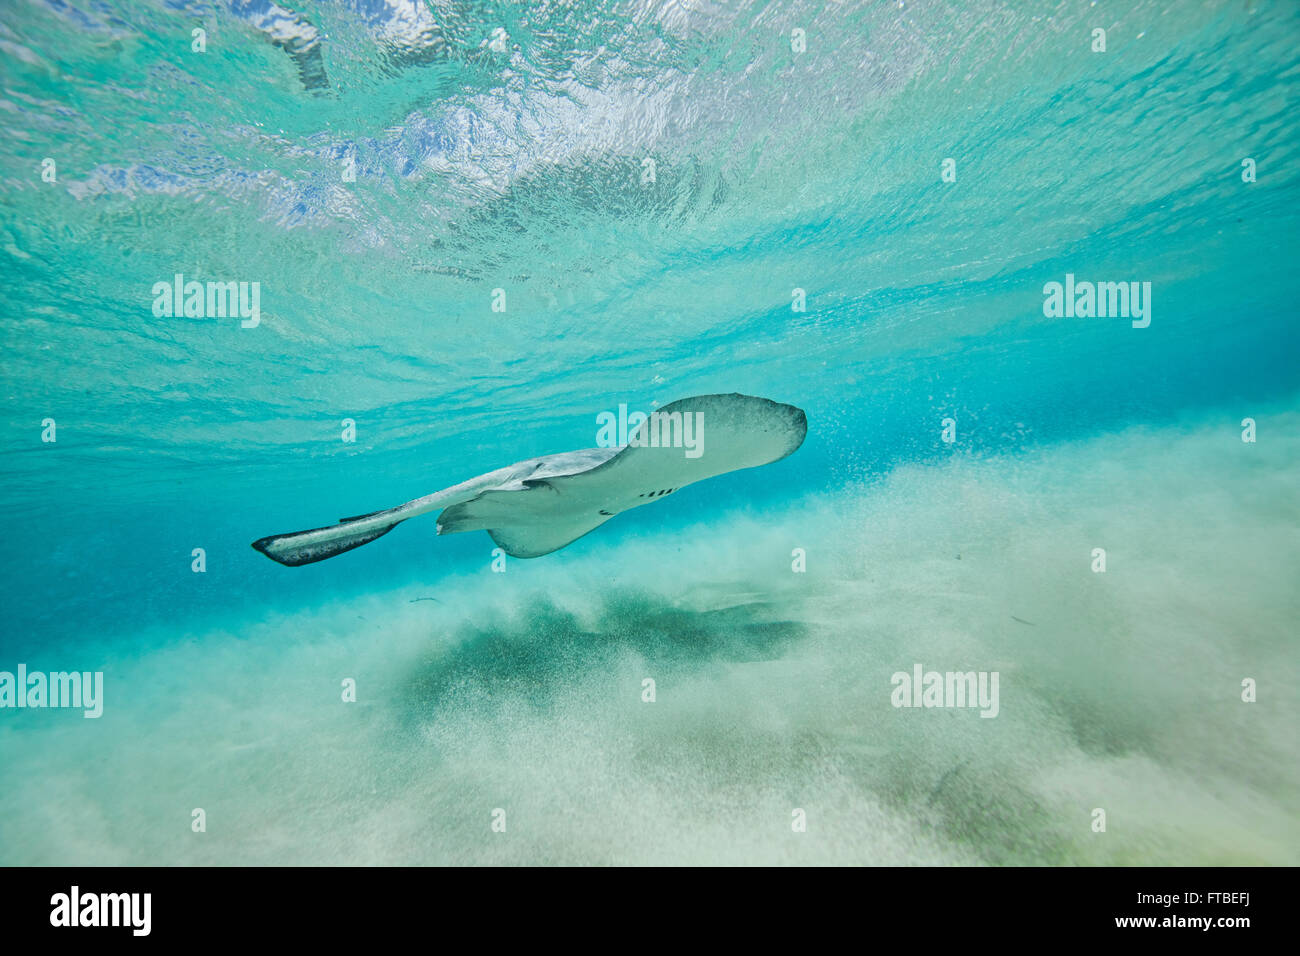 Giant Southern Stingray swimming along the sandy bottom with the waves kicking up the sand with a reflection on the surface Stock Photo